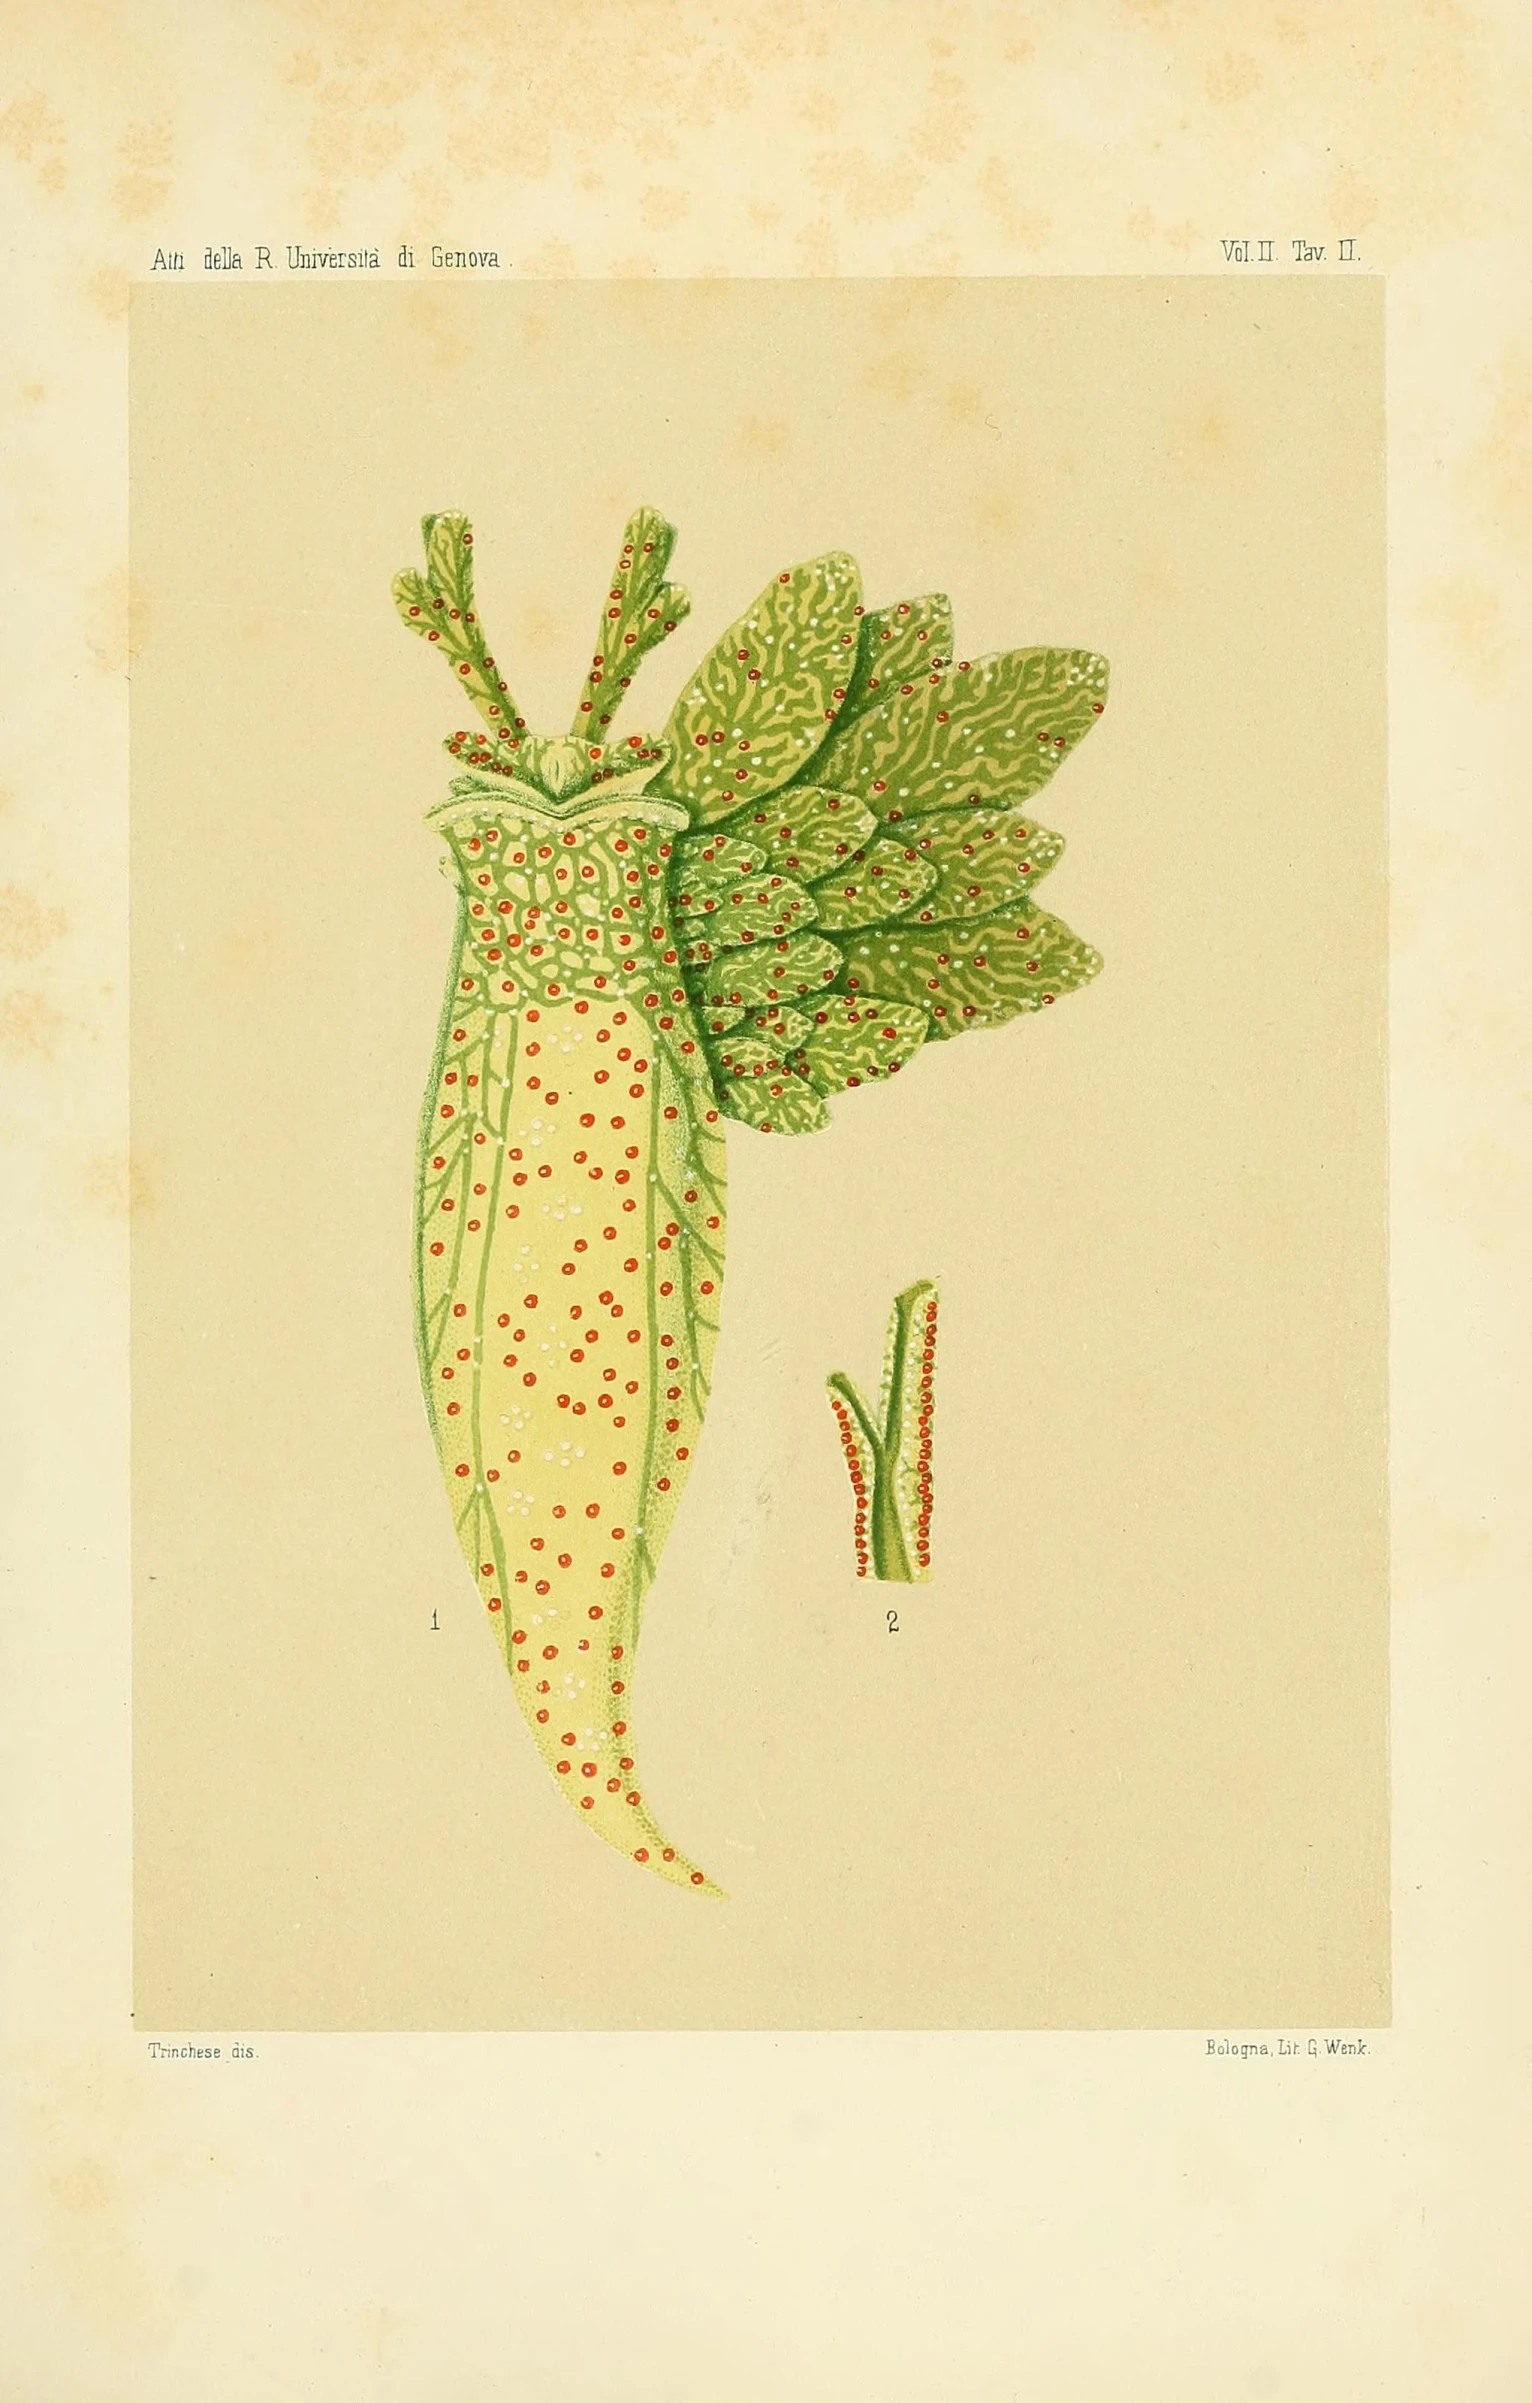 an illustration of a plant with large leaves